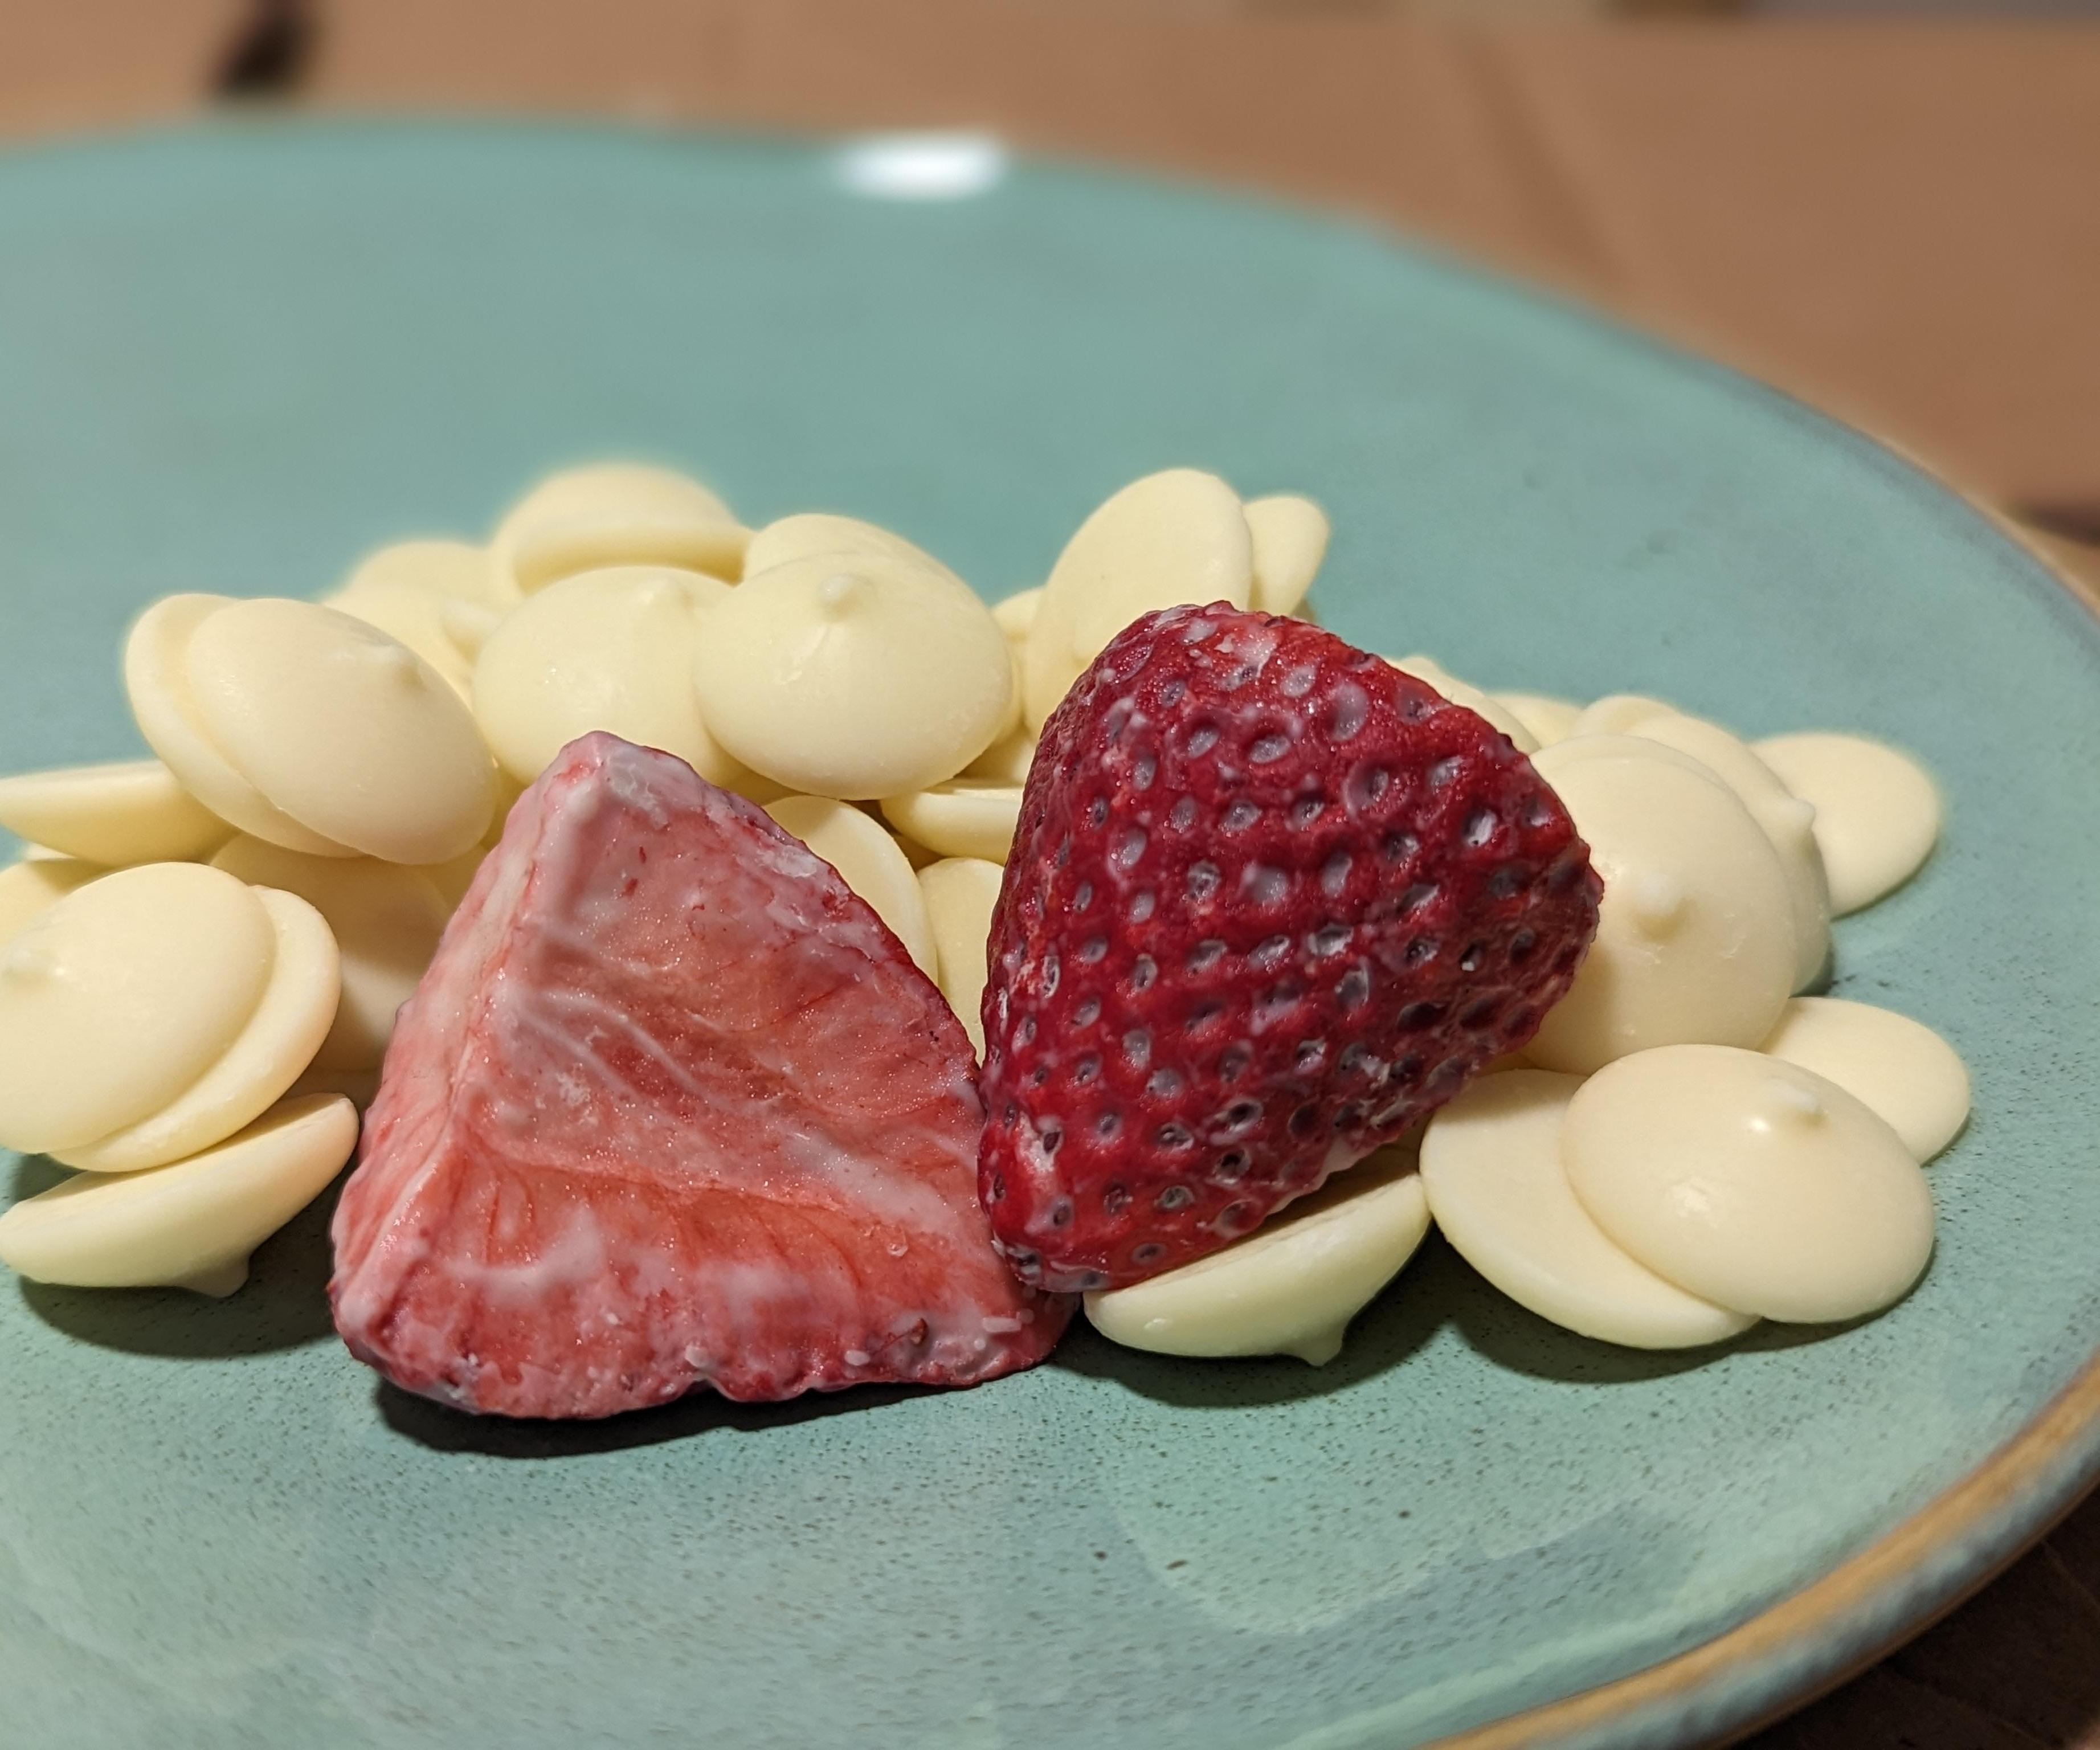 Hyper-dried Strawberries Infused With Chocolate